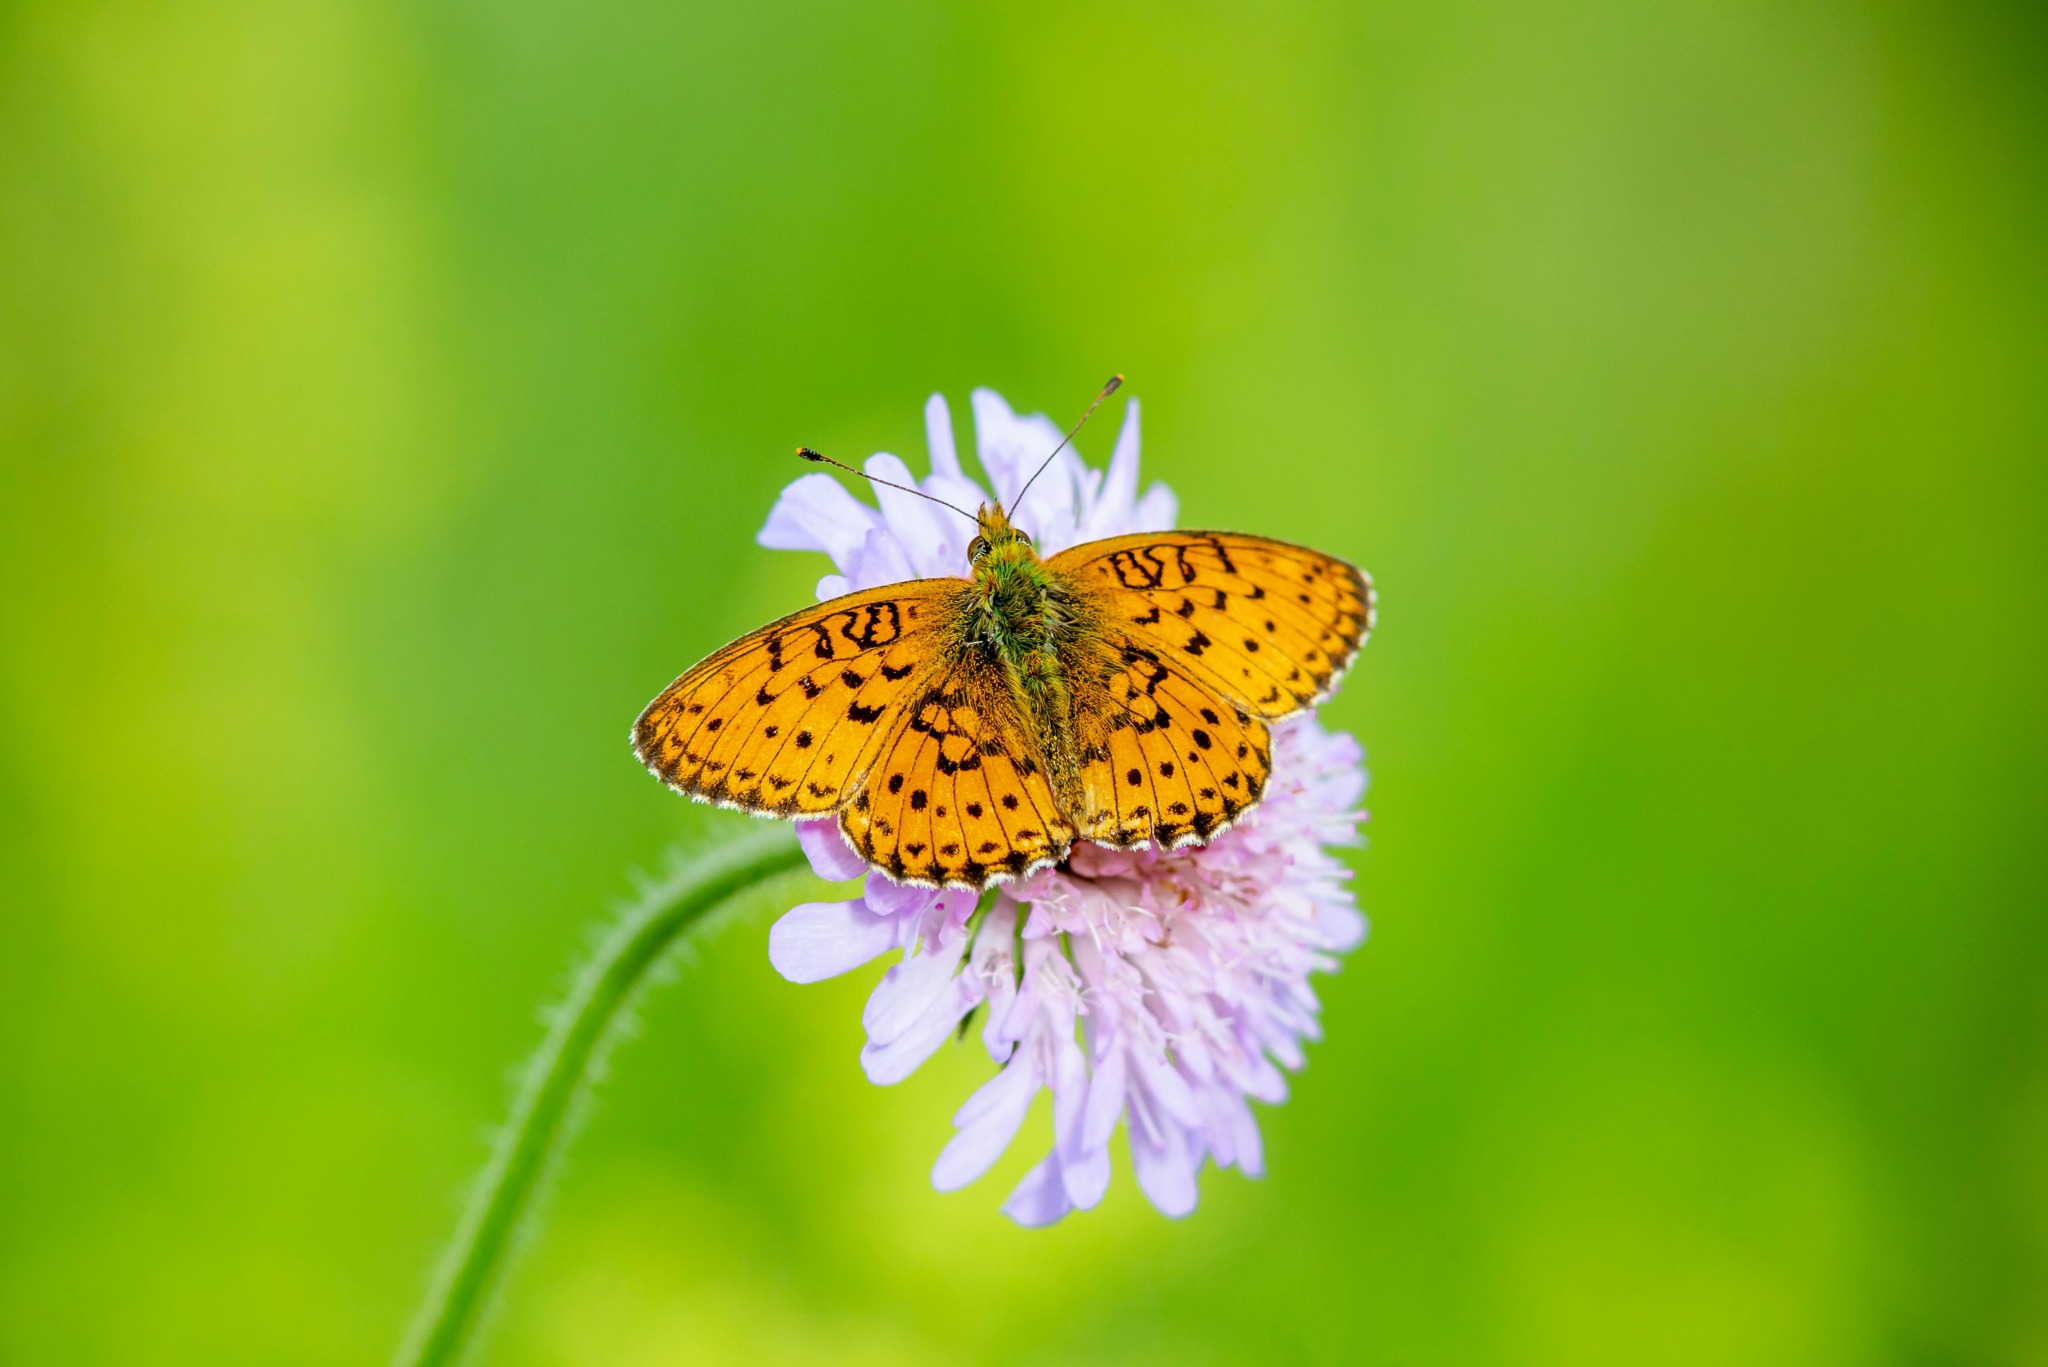  Lesser marbled fritillary (Brenthis ino)